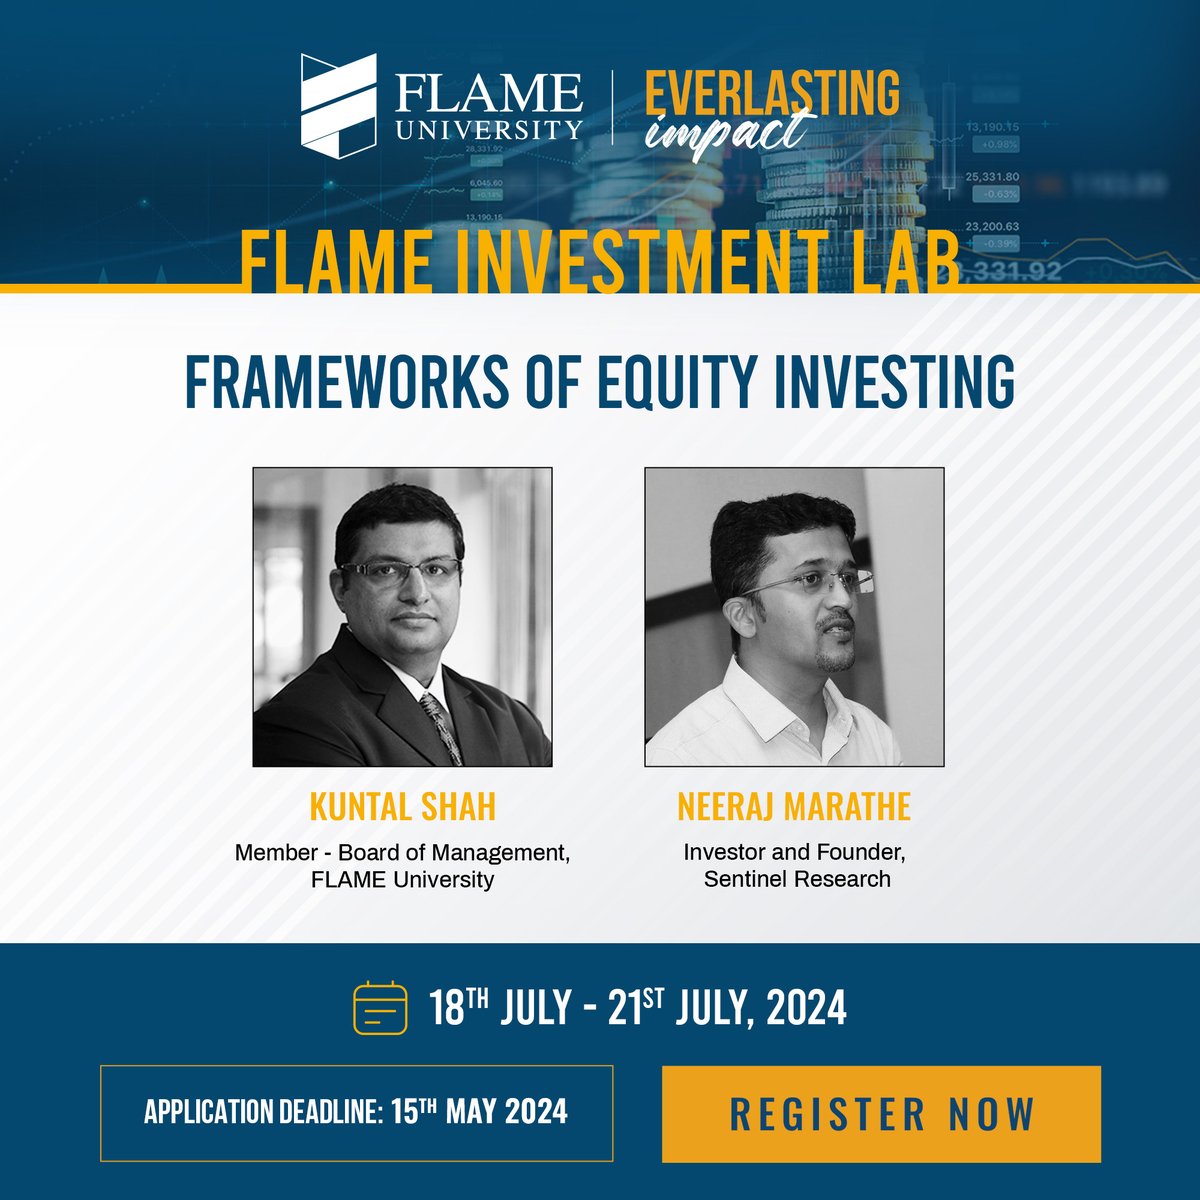 Unlock the secrets of value investing with FLAME University’s ‘Frameworks of Equity Investing’ program, led by @Kuntalhshah and @NeerajMarathe.  Understand and analyze businesses and investments from a value investing perspective using primary and secondary sources, while